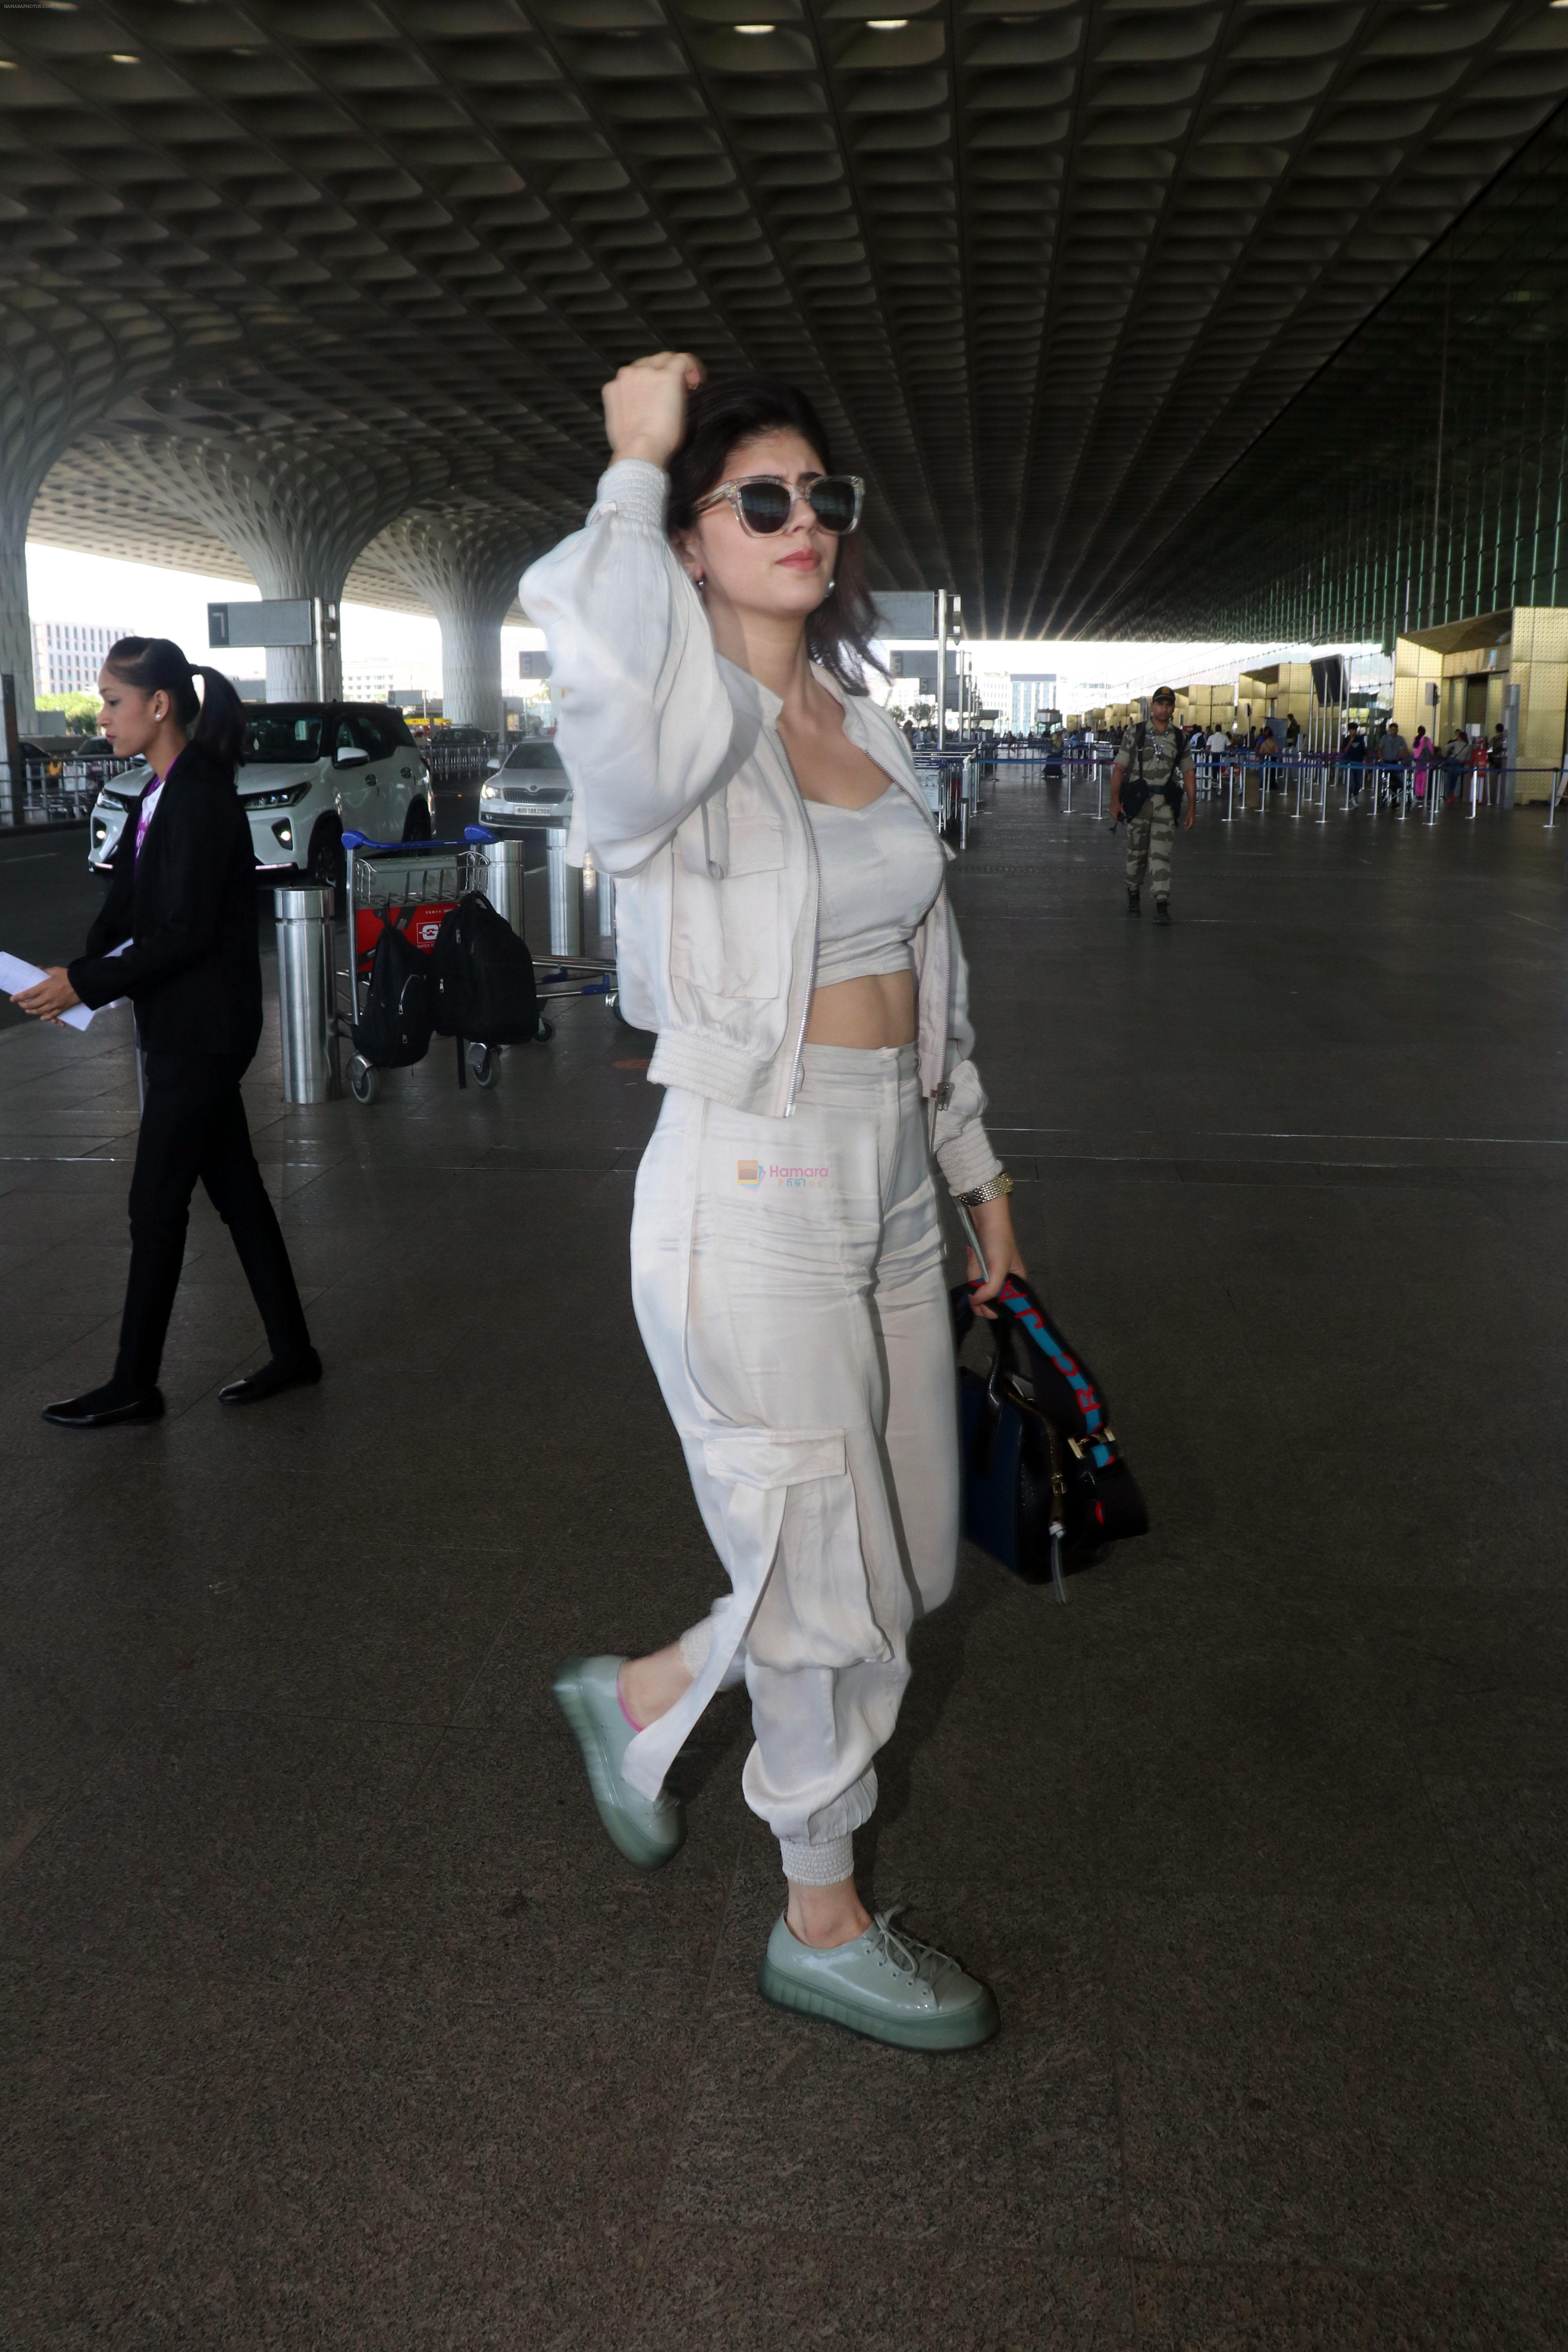 Sanjana Sanghi holding bag wearing cream colored long sleeved top and trousers and grey footwear with laces